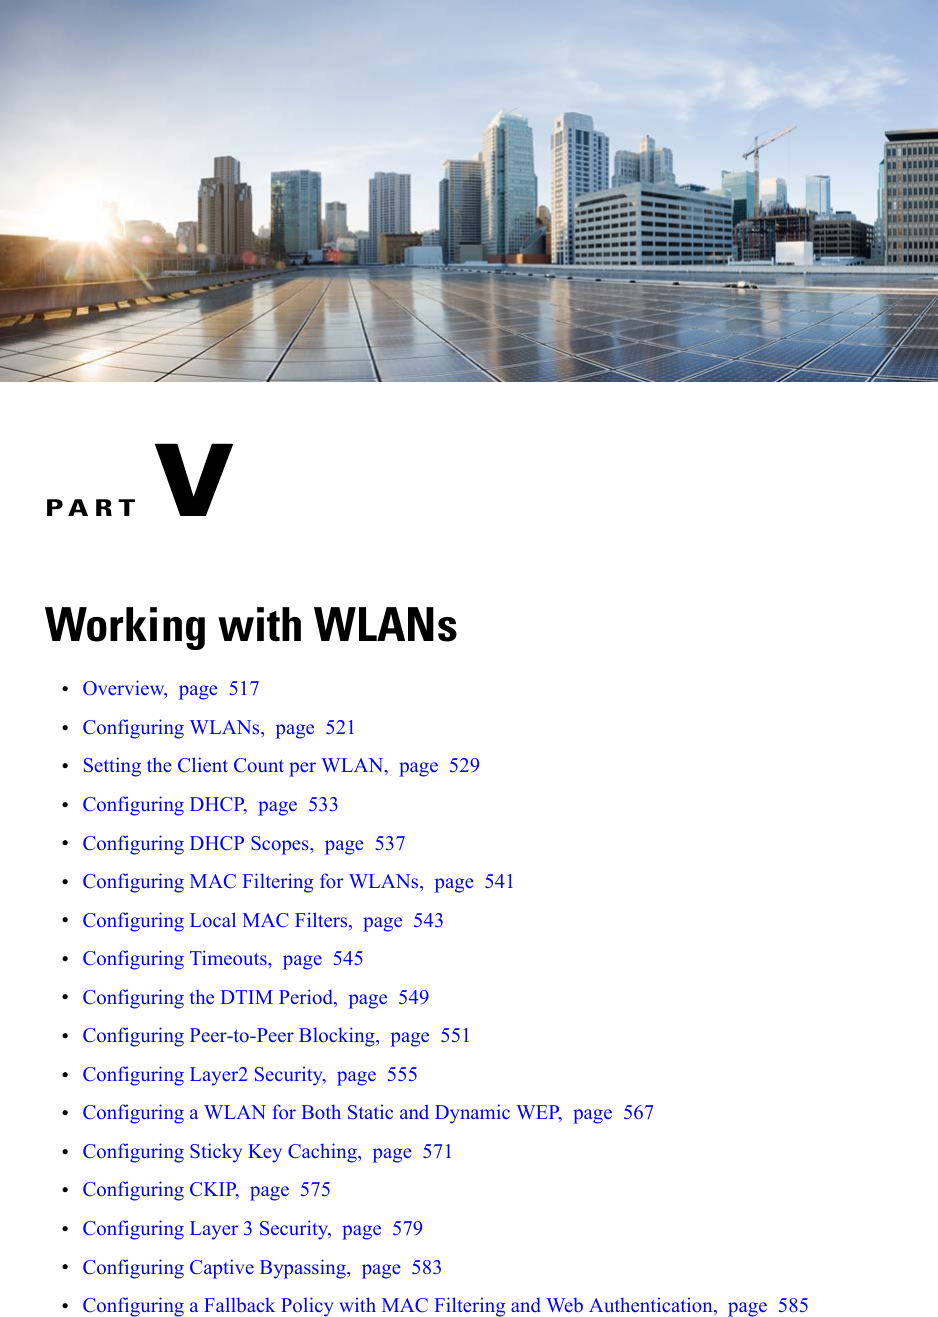 PART VWorking with WLANs•Overview, page 517•Configuring WLANs, page 521•Setting the Client Count per WLAN, page 529•Configuring DHCP, page 533•Configuring DHCP Scopes, page 537•Configuring MAC Filtering for WLANs, page 541•Configuring Local MAC Filters, page 543•Configuring Timeouts, page 545•Configuring the DTIM Period, page 549•Configuring Peer-to-Peer Blocking, page 551•Configuring Layer2 Security, page 555•Configuring a WLAN for Both Static and Dynamic WEP, page 567•Configuring Sticky Key Caching, page 571•Configuring CKIP, page 575•Configuring Layer 3 Security, page 579•Configuring Captive Bypassing, page 583•Configuring a Fallback Policy with MAC Filtering and Web Authentication, page 585